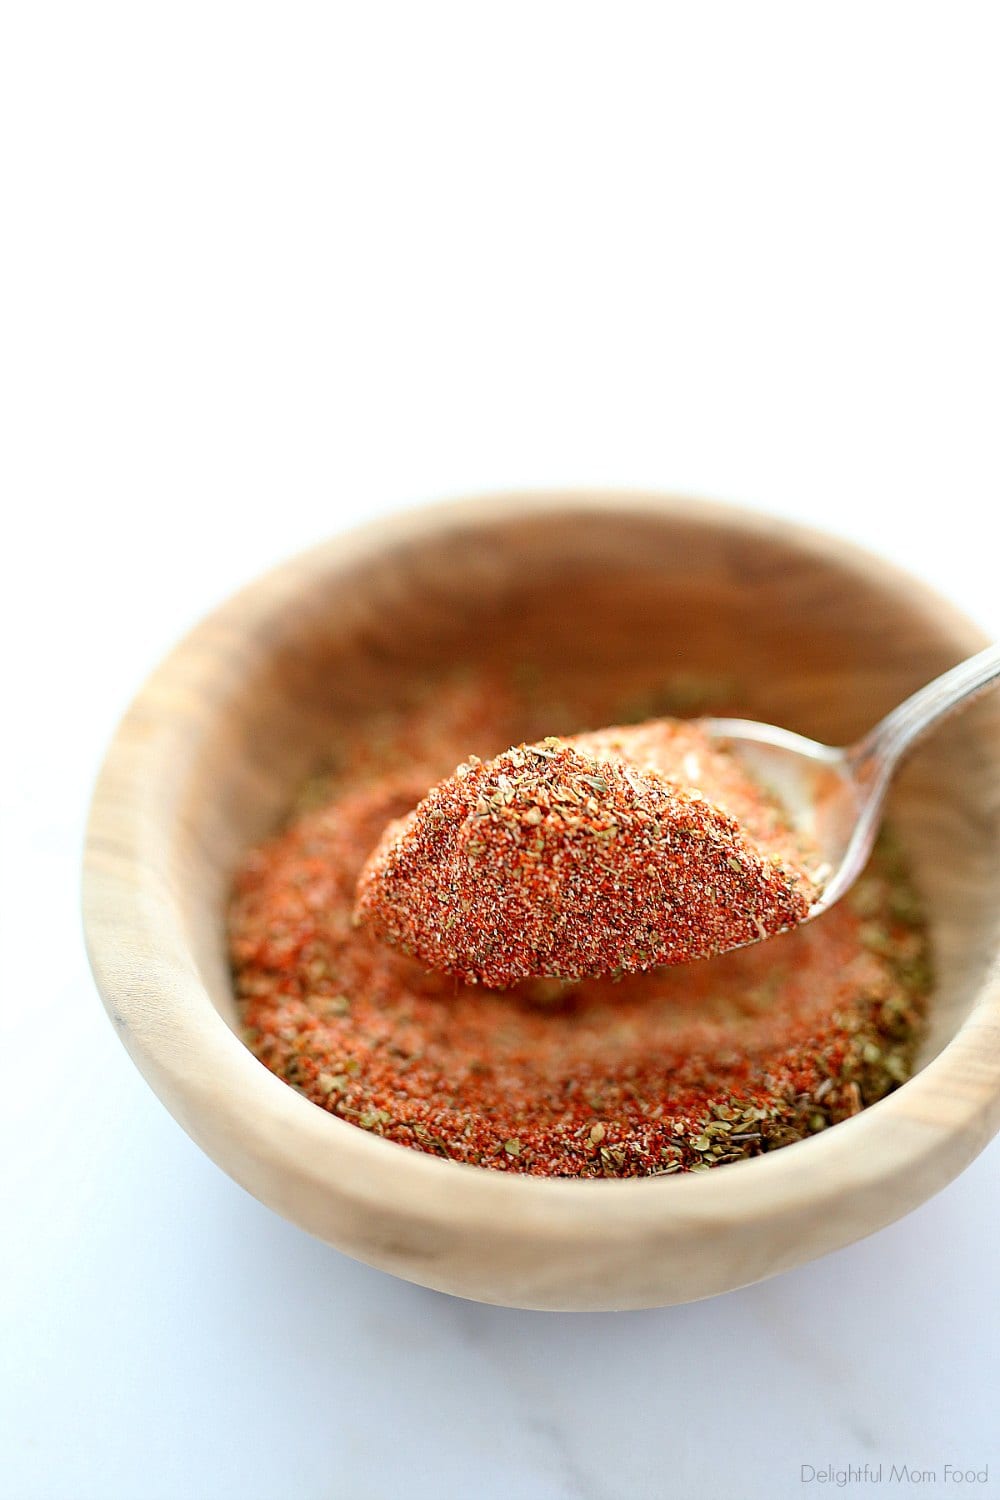 Spicy Cajun shrimp seasoning is a blend of spices and herbs that brings bold kick to seafood recipes! Anytime you are out of store-bought Cajun seasoning mix, make it at home combining paprika, garlic powder, onion powder, salt, pepper, cayenne pepper, oregano and thyme. Use it for all spicy seafood recipes! #Cajunshrimpseasoning #cajun #seasoning #mix #recipe #spices #herbs #homemade | Recipe at Delightful Mom Food